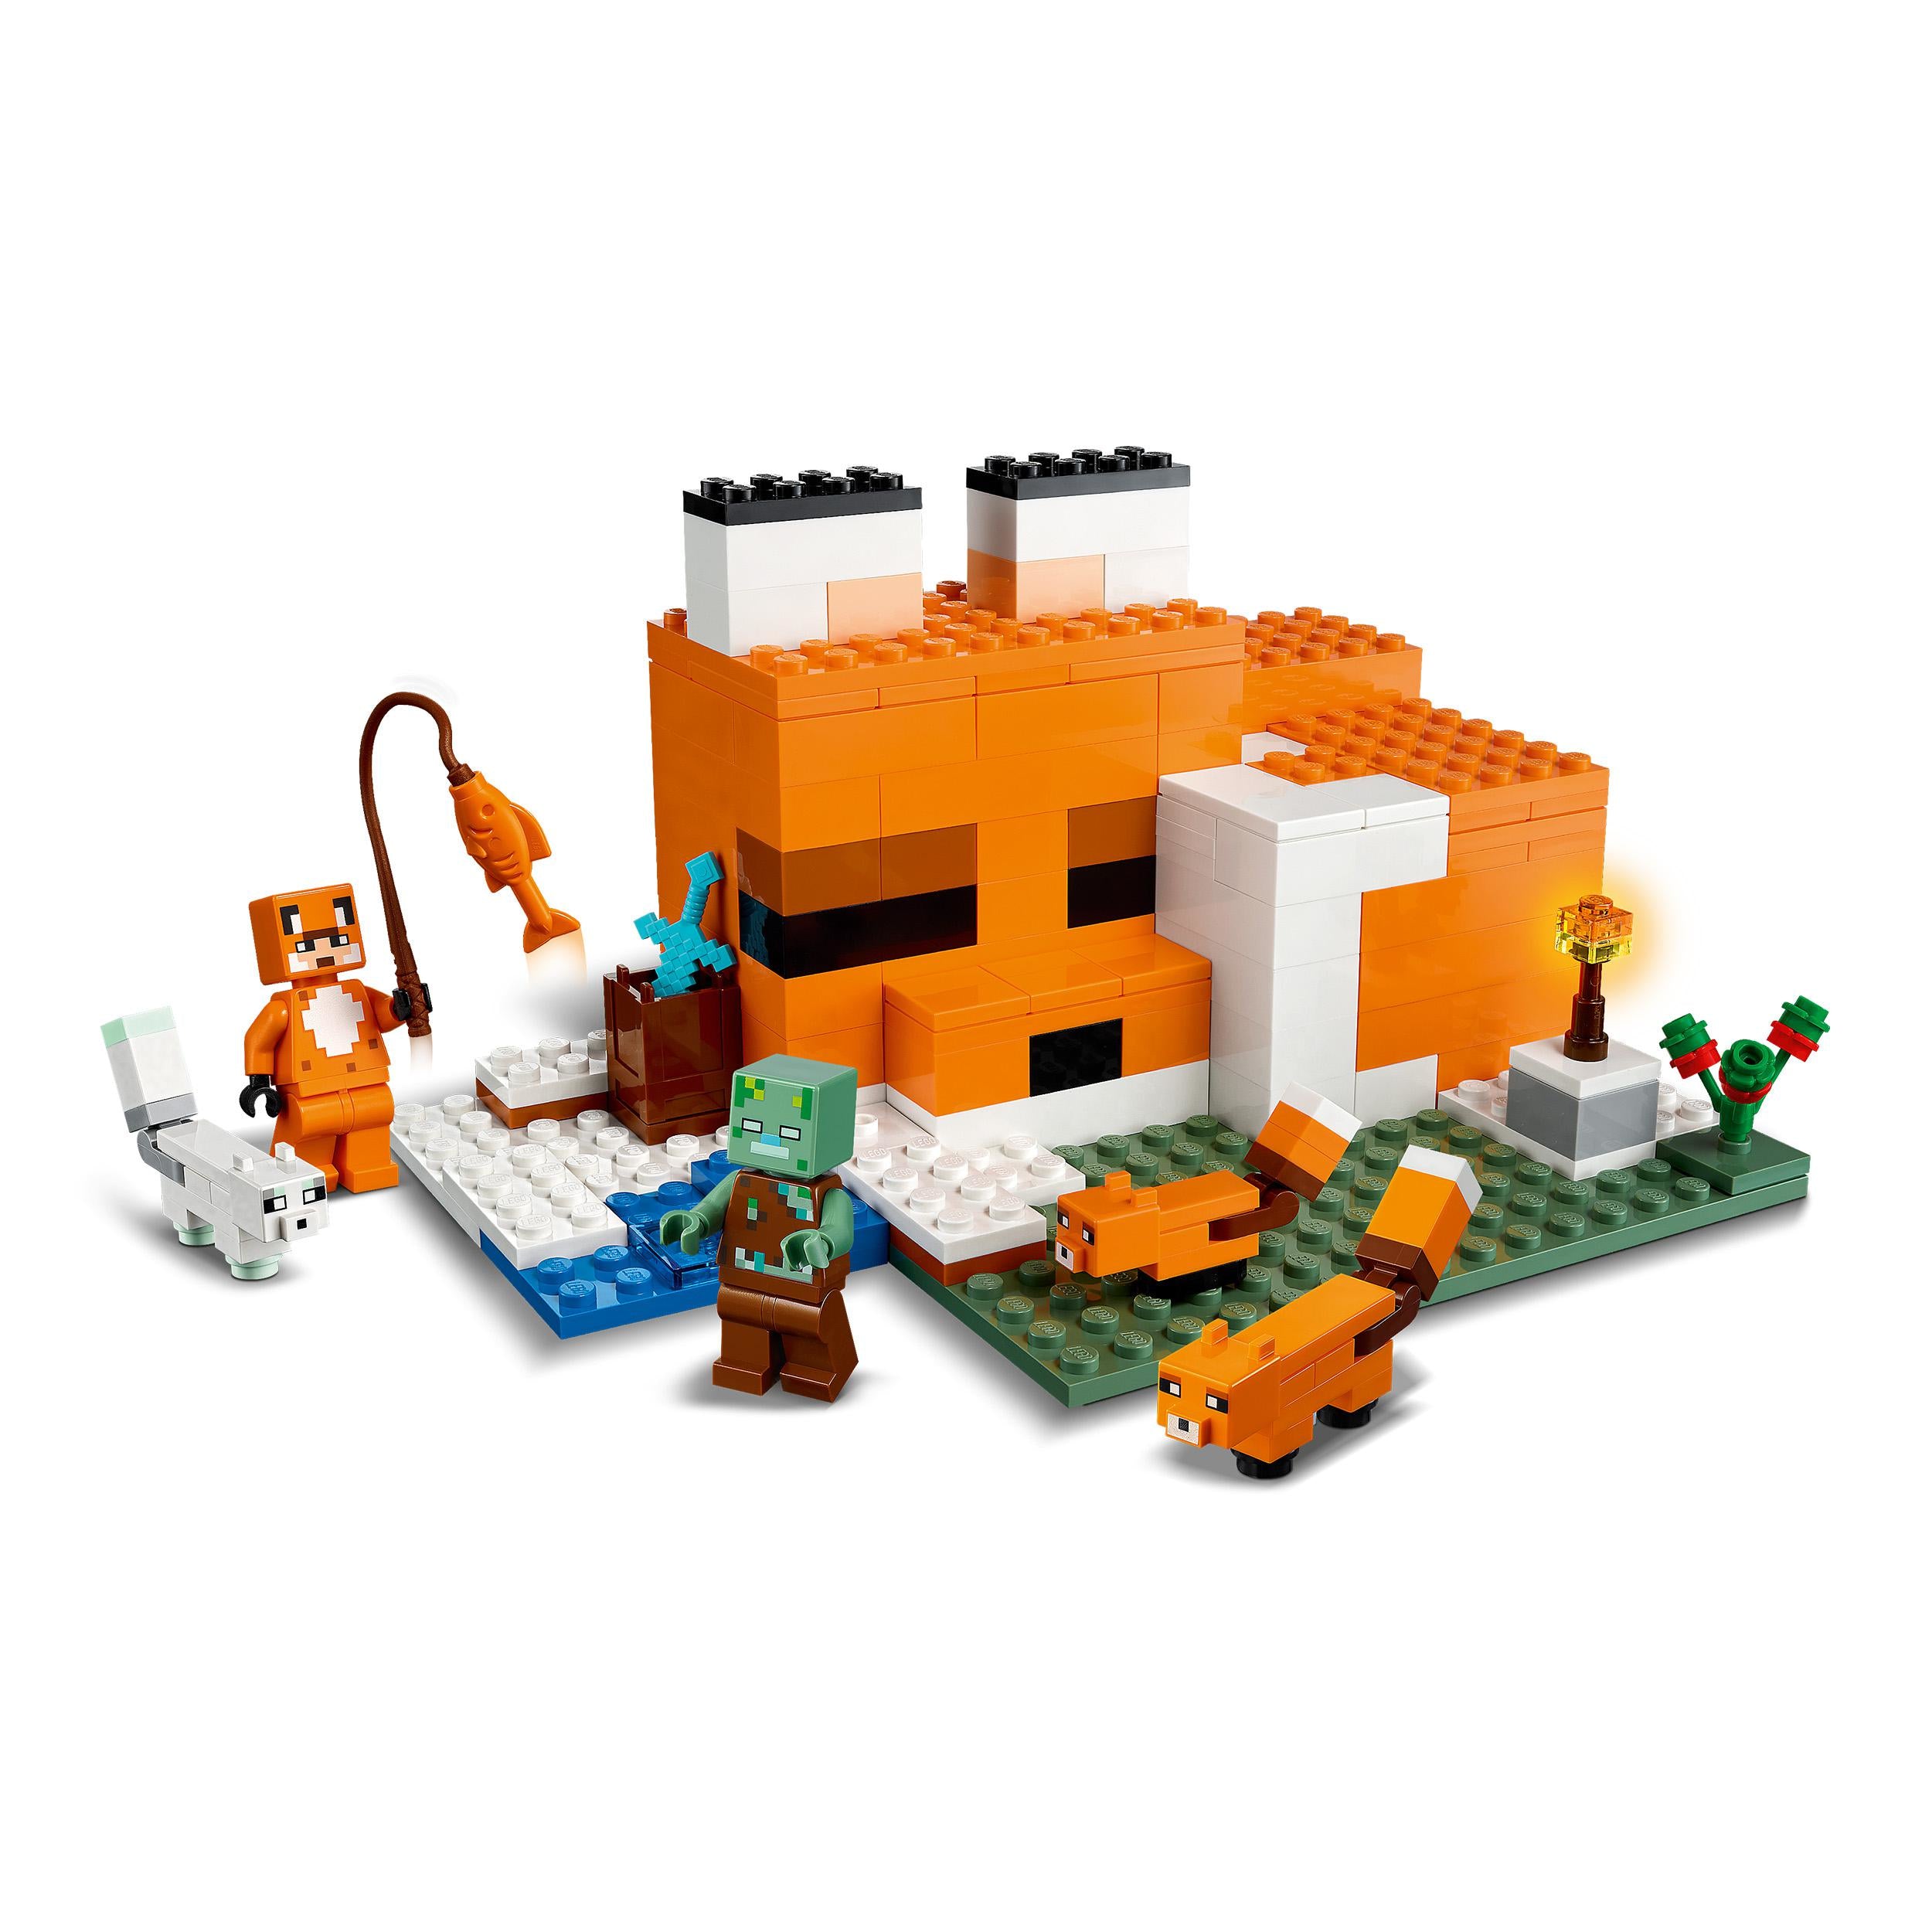 LEGO 21178 Minecraft The Fox Lodge House Animals Toy for Kids 8 Years Old, Set with Drowned Zombie